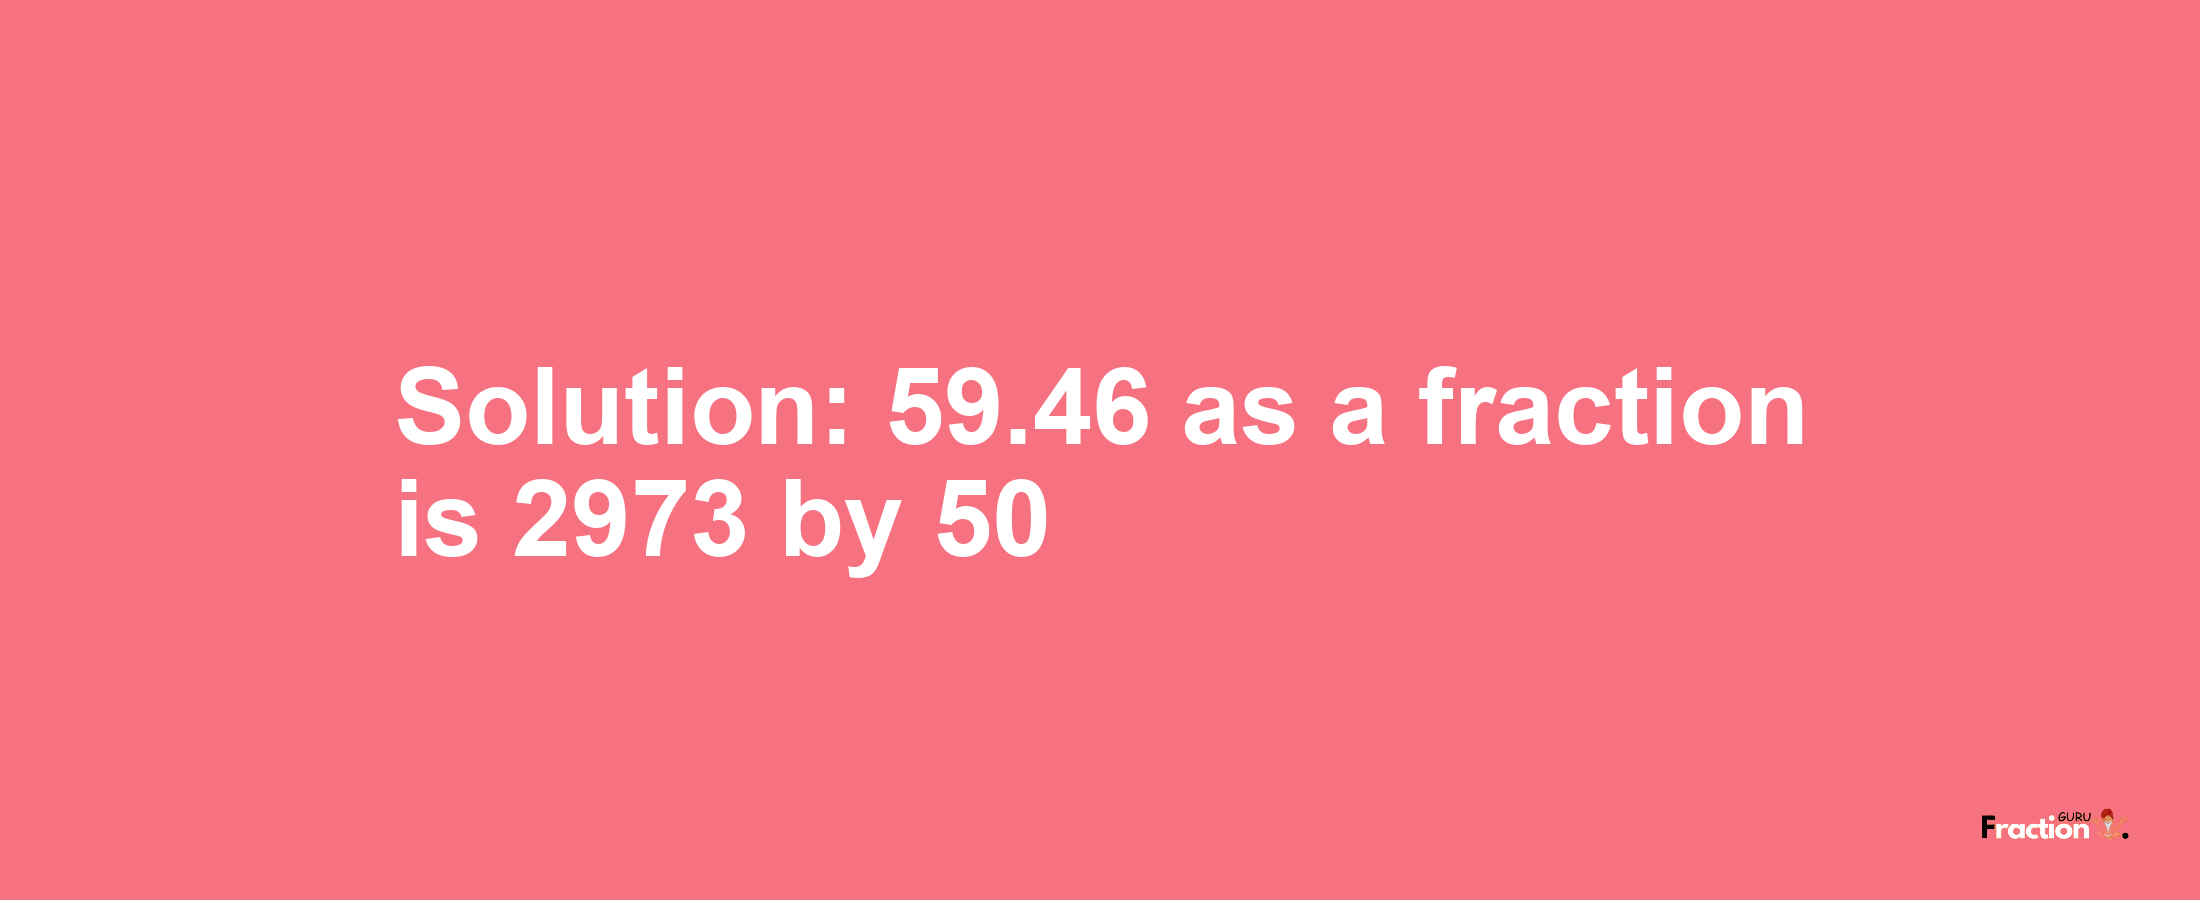 Solution:59.46 as a fraction is 2973/50